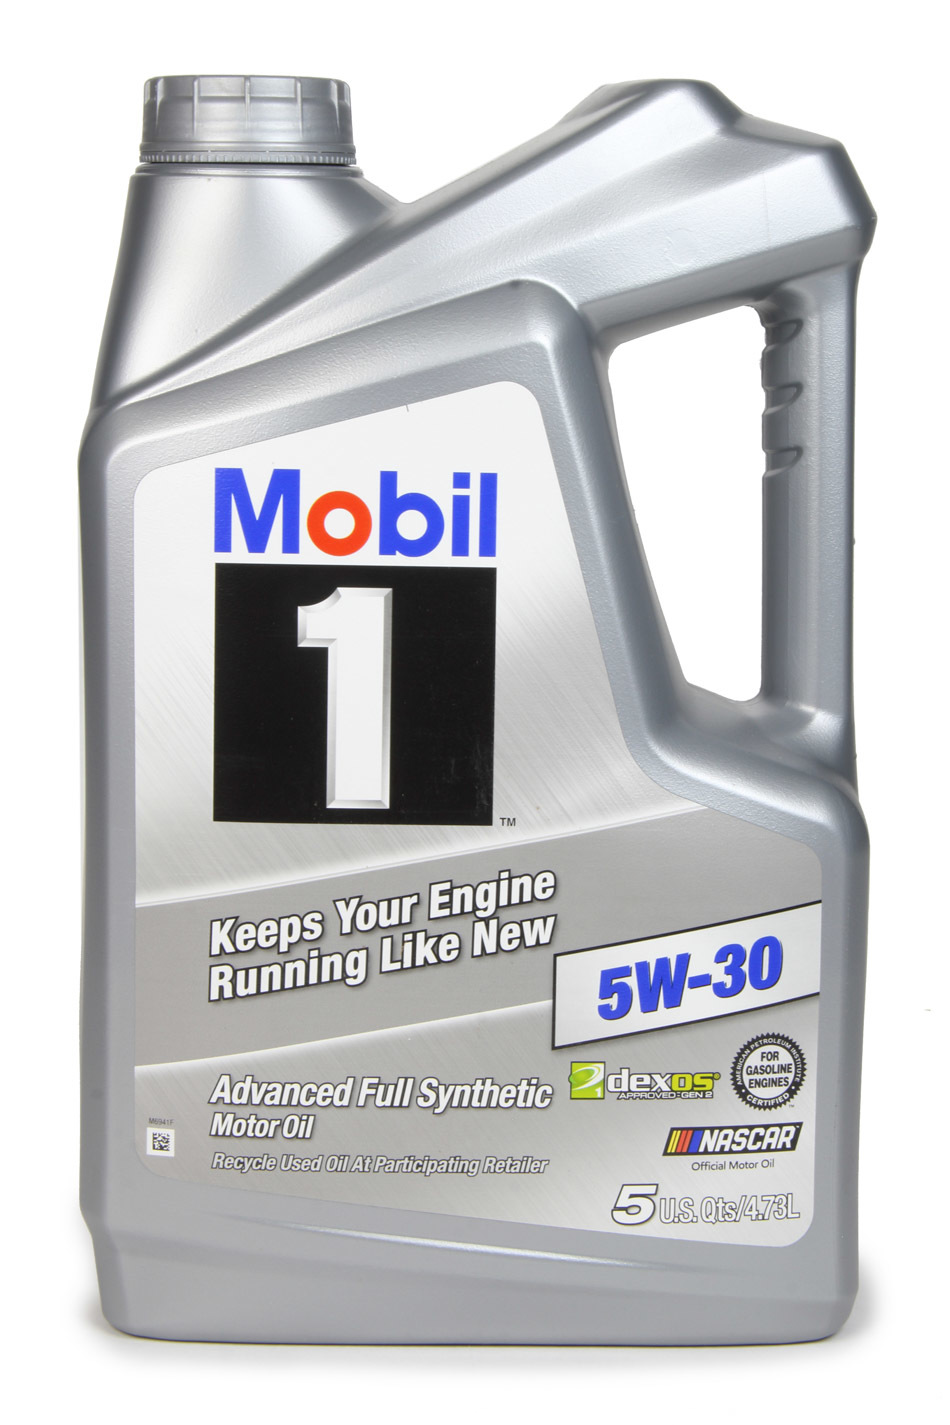 MOBIL 1 Motor Oil Advanced Full Synthetic 5W30 Synthetic 5 qt Jug Each